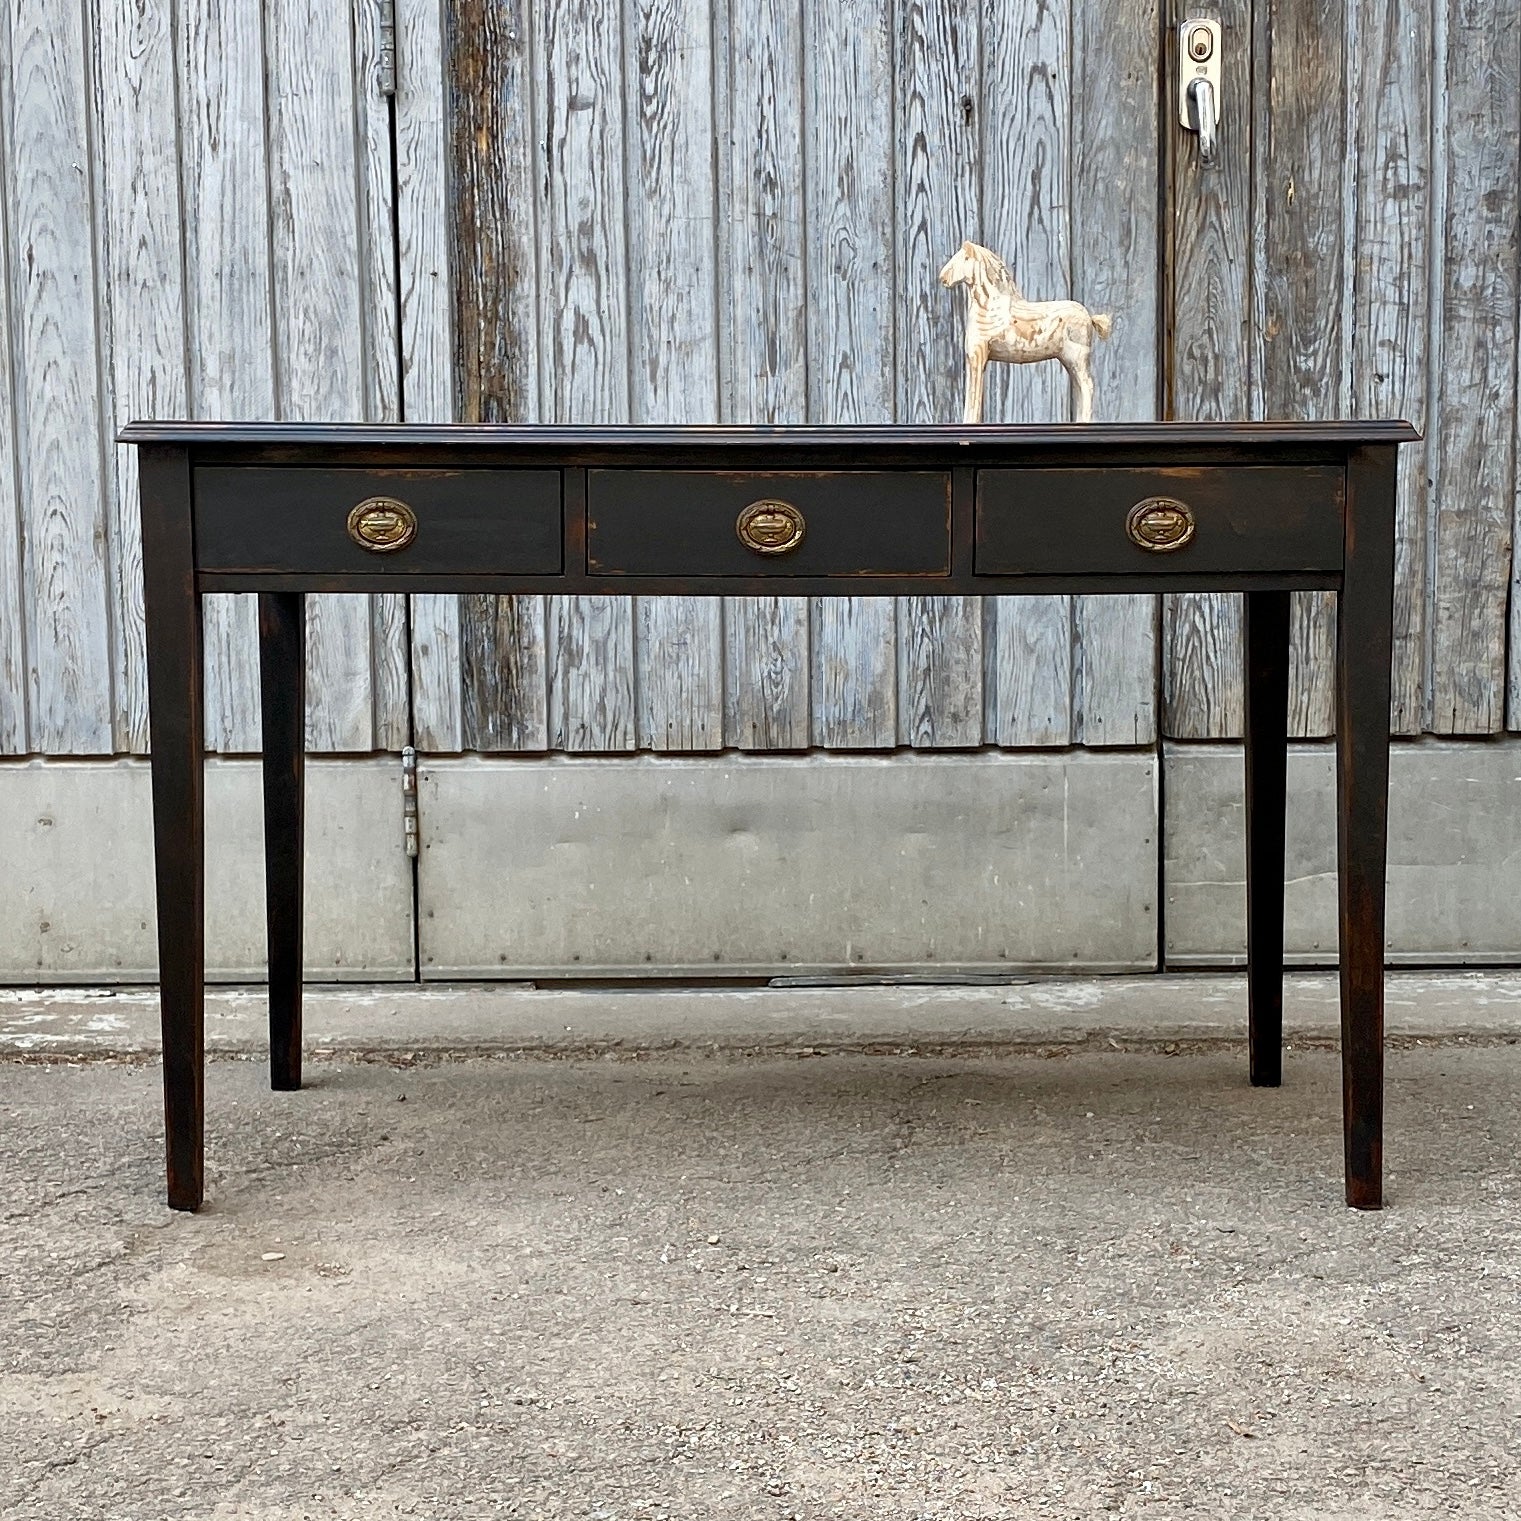 Swedish Gustavian ladies writing desk. Charming three drawer black painted desk with three drawers. Vintage embossed leather top and original brass hardware. Banded with Greek key pattern.